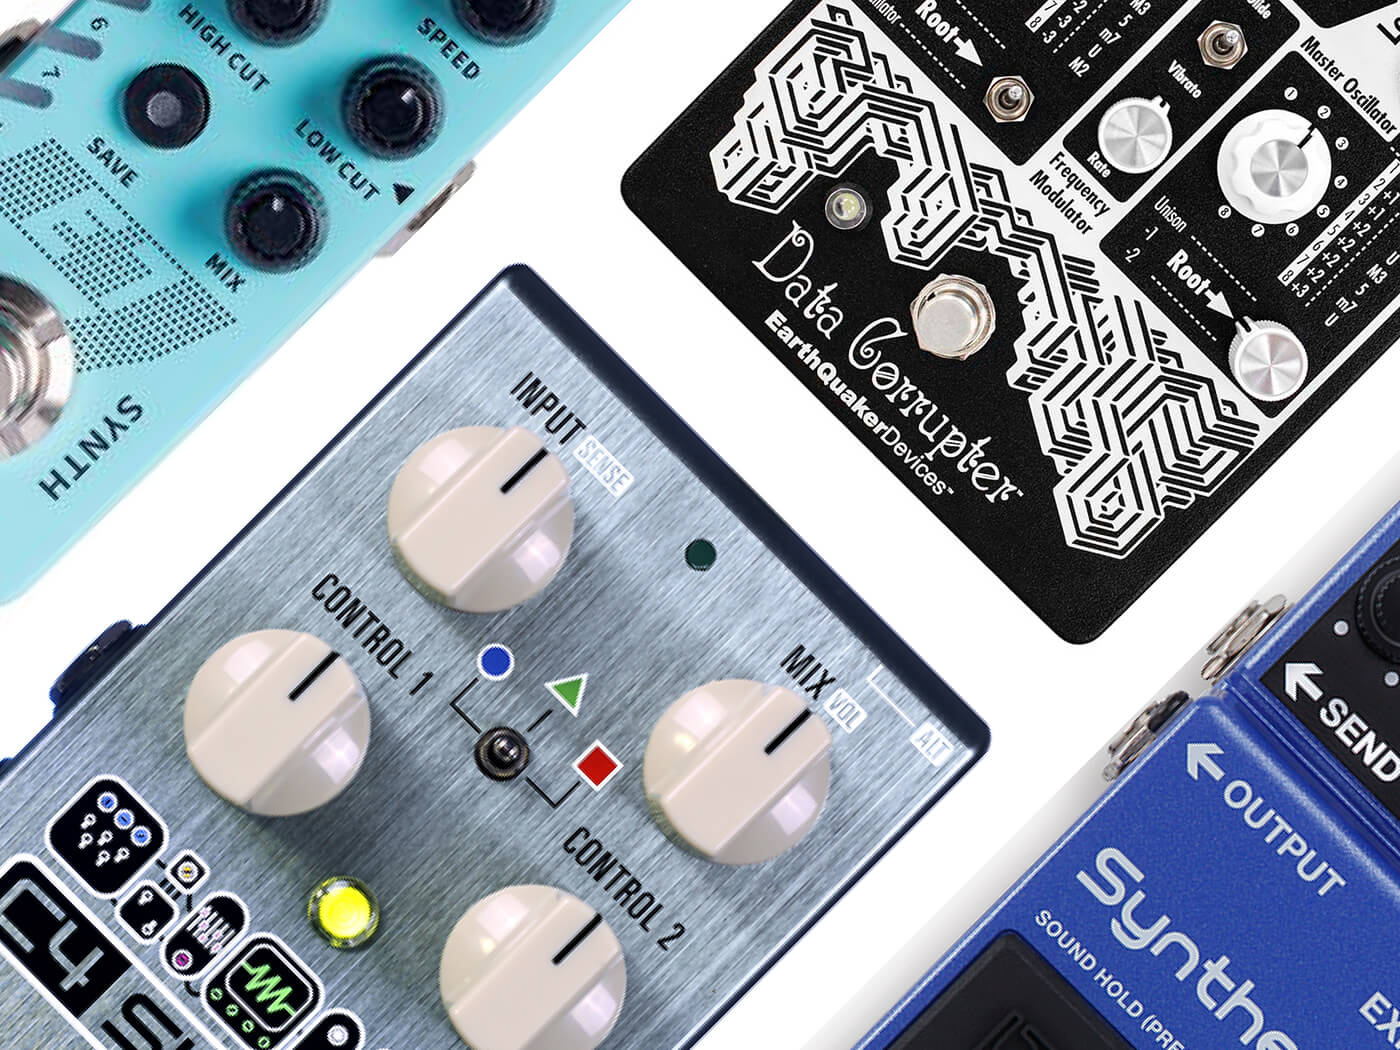 15 Best Synth Pedals 2019